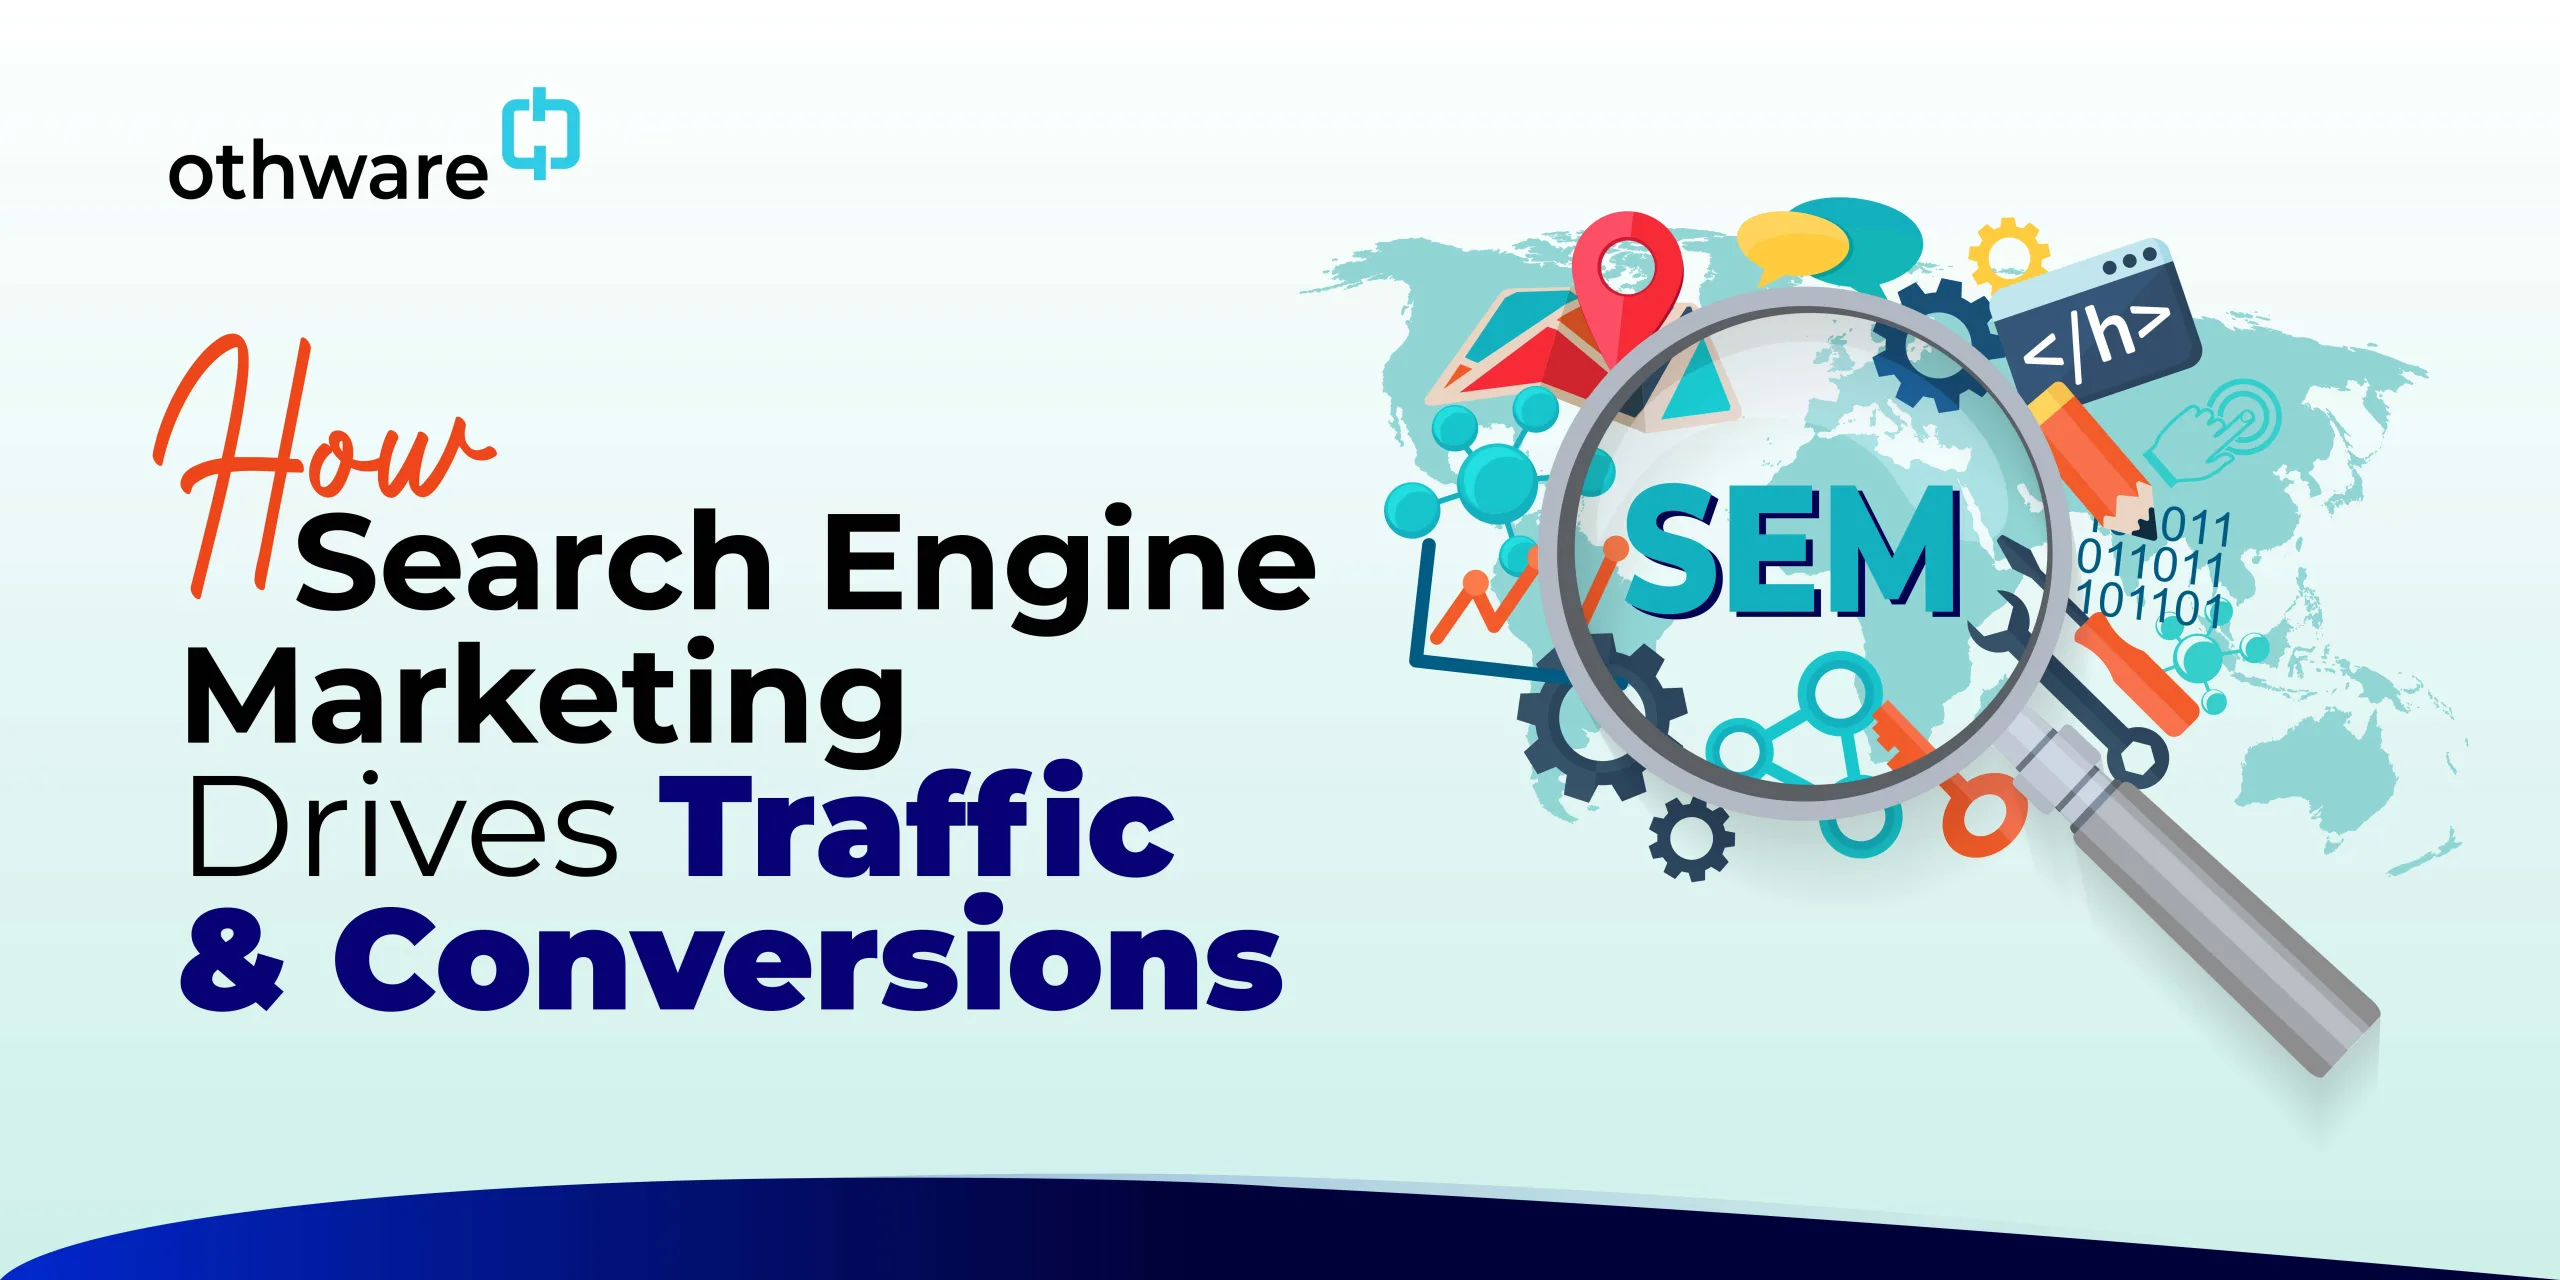 SEM driving traffic and conversions